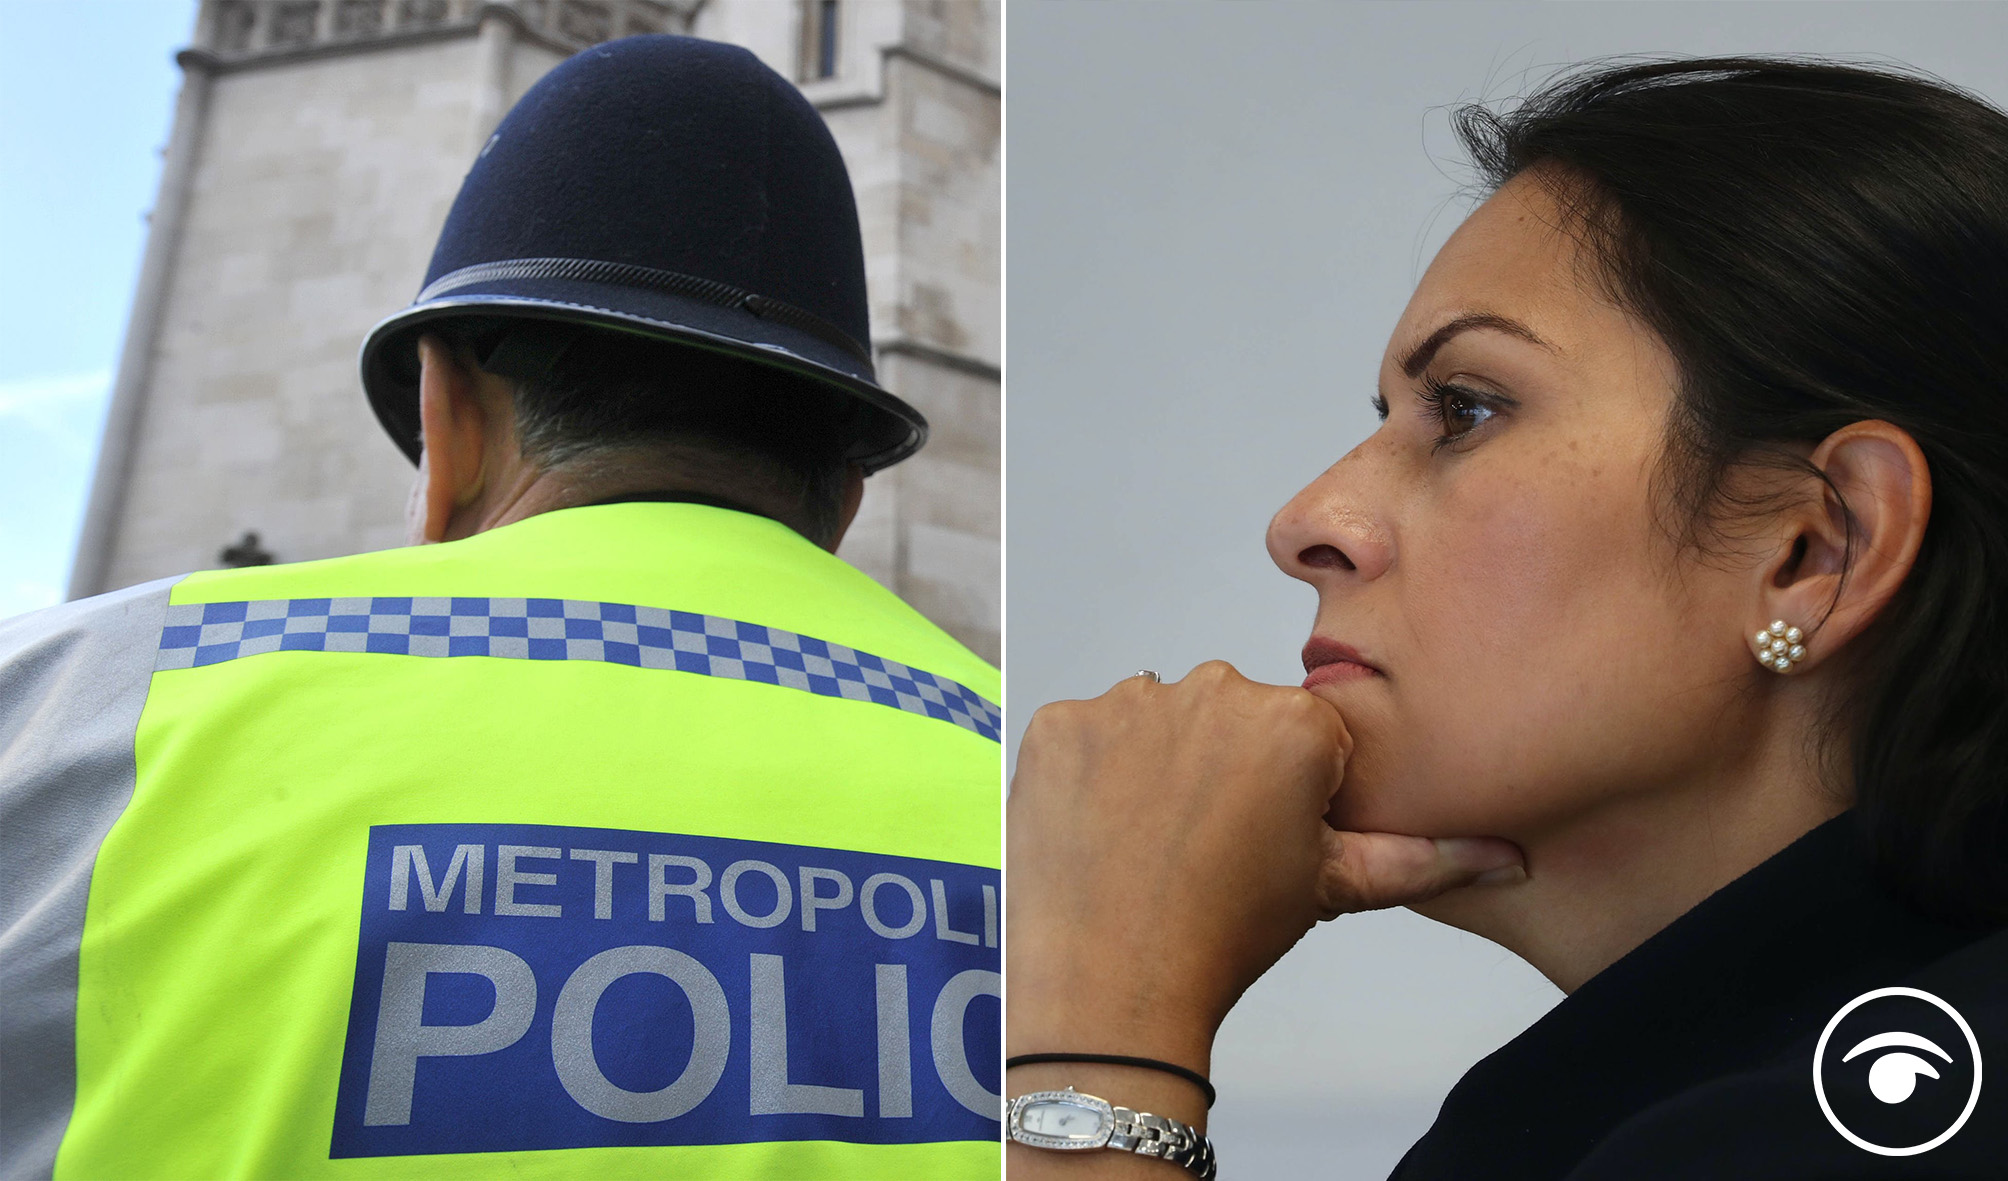 Priti Patel’s claim about police officer numbers is slammed in viral video